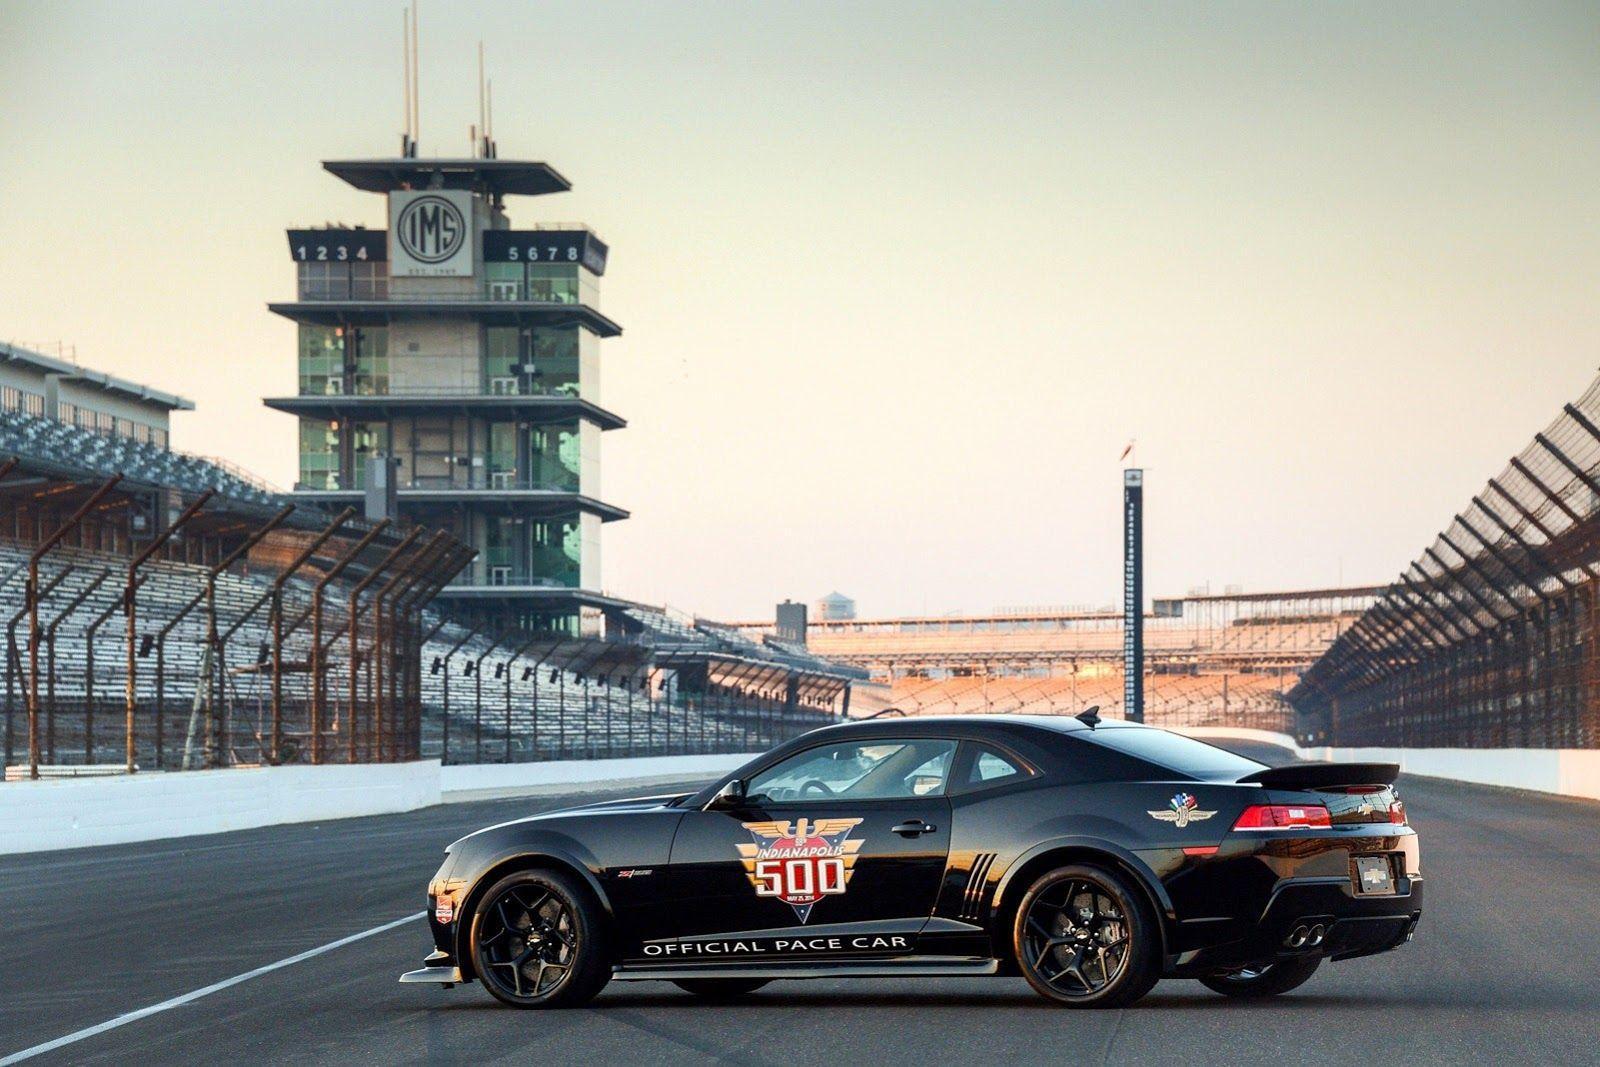 Camaro Z 28 Is To Pace 2014 Indy 500. AmcarGuide.com